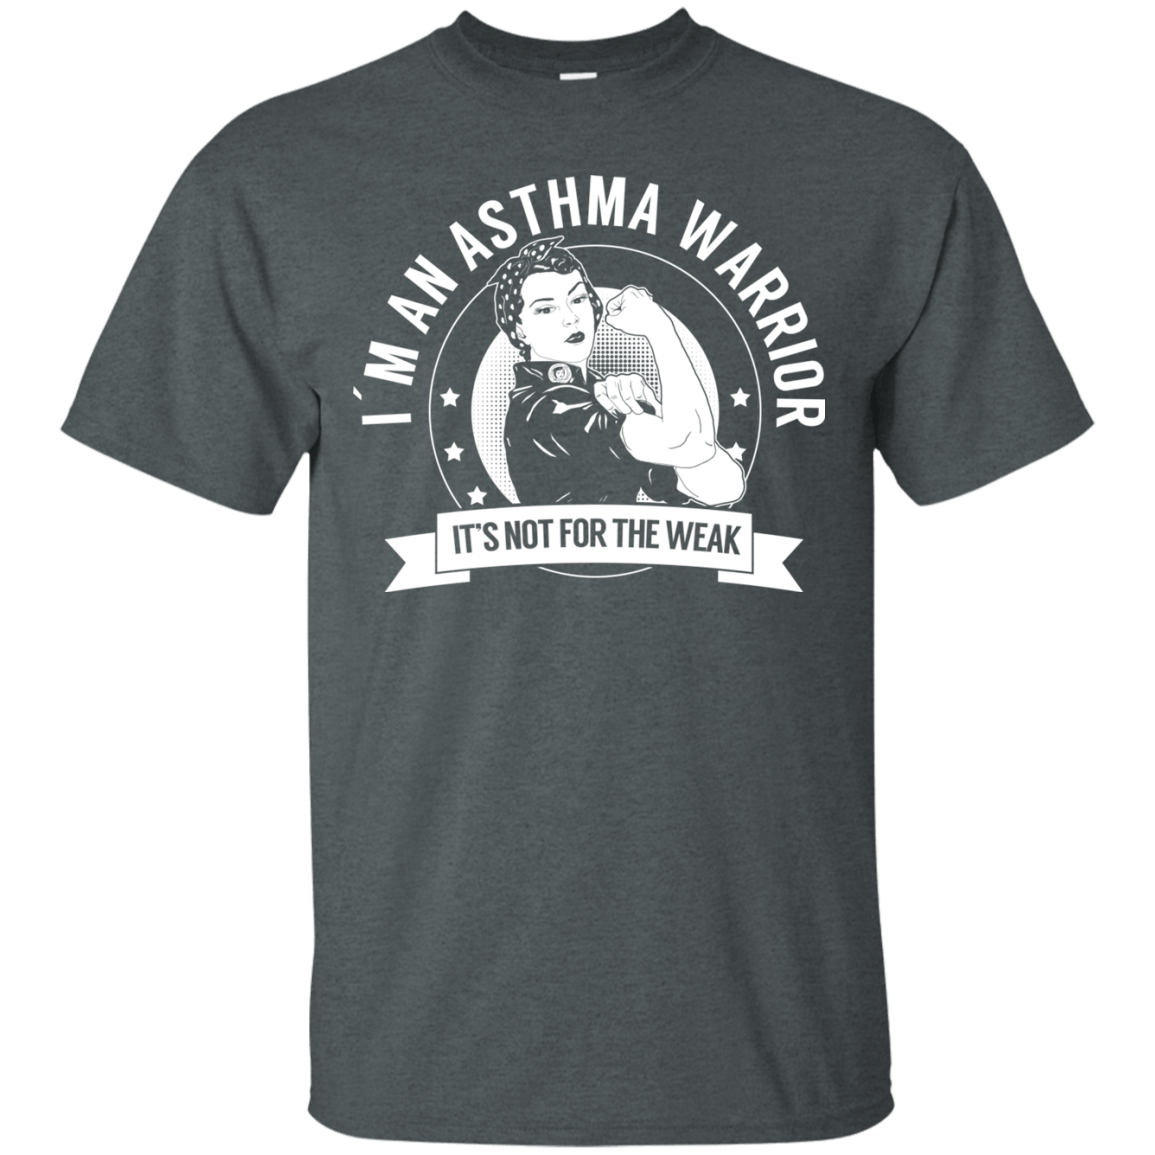 Asthma Warrior NFTW Unisex Shirt - The Unchargeables